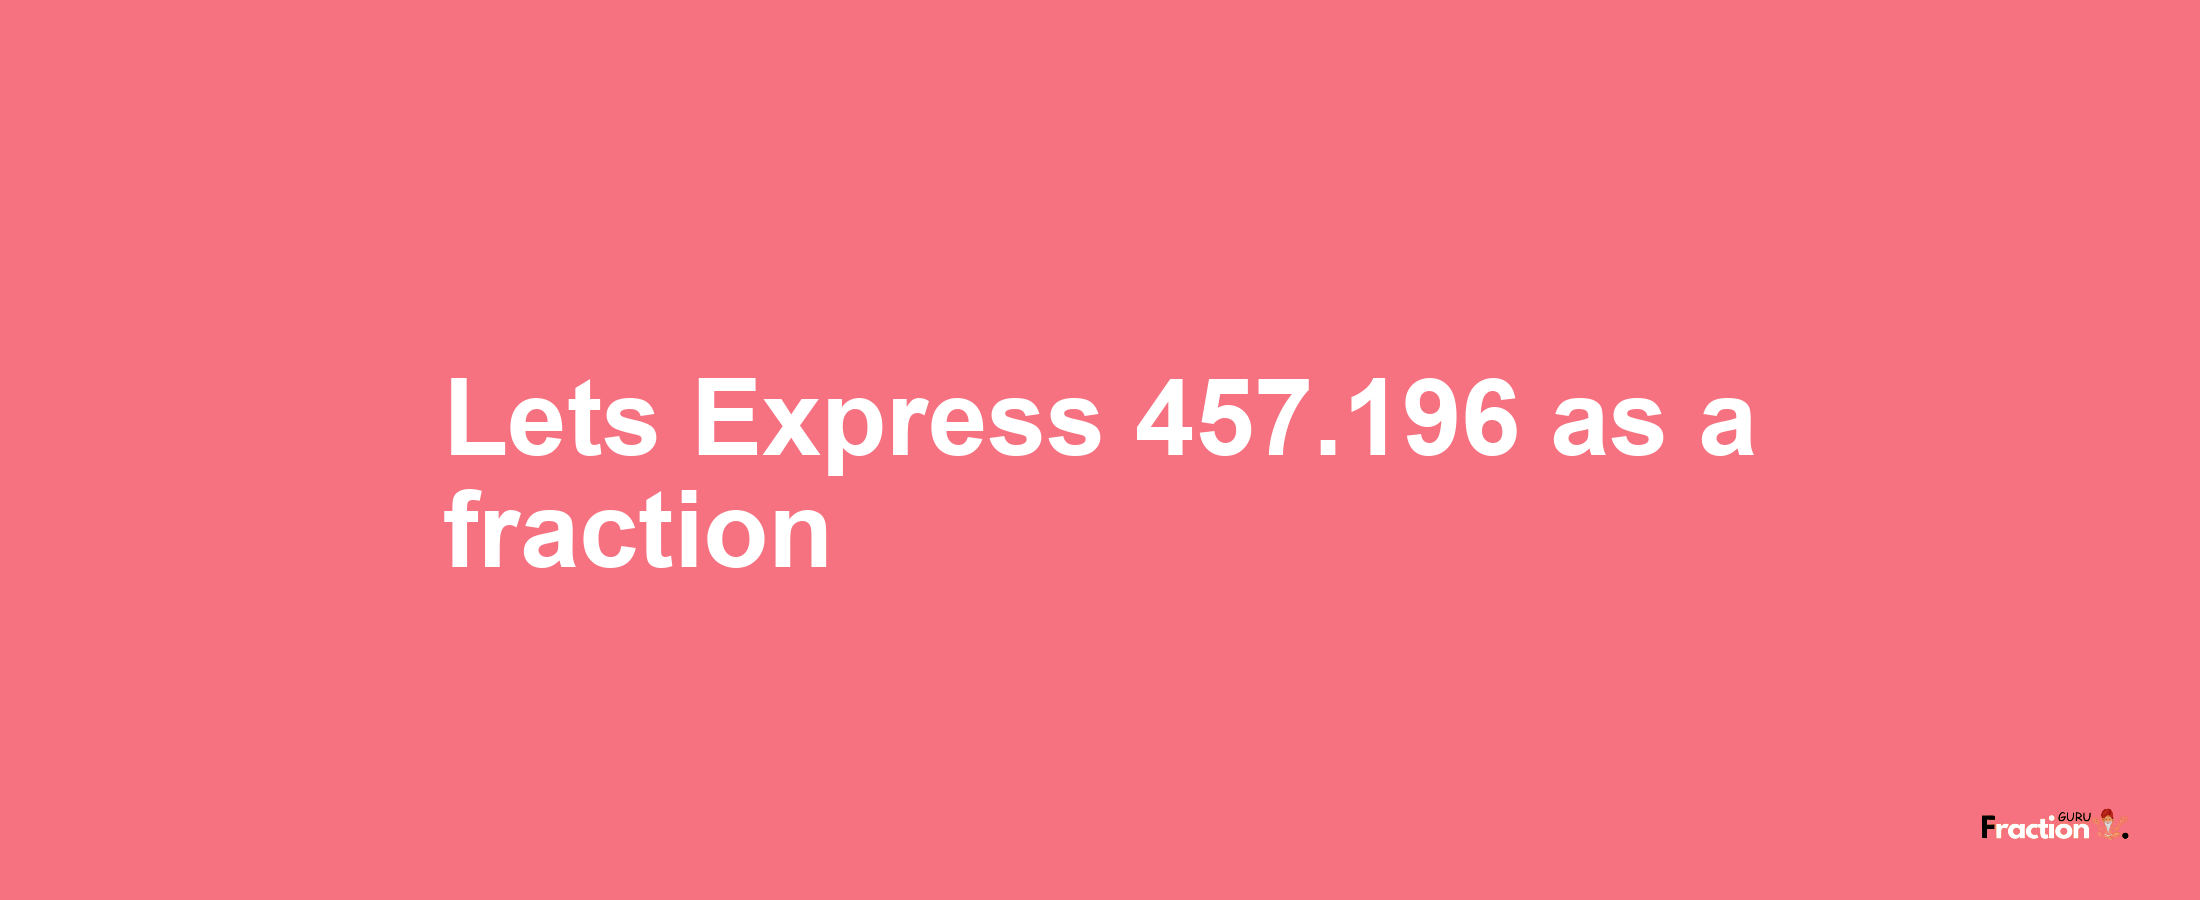 Lets Express 457.196 as afraction